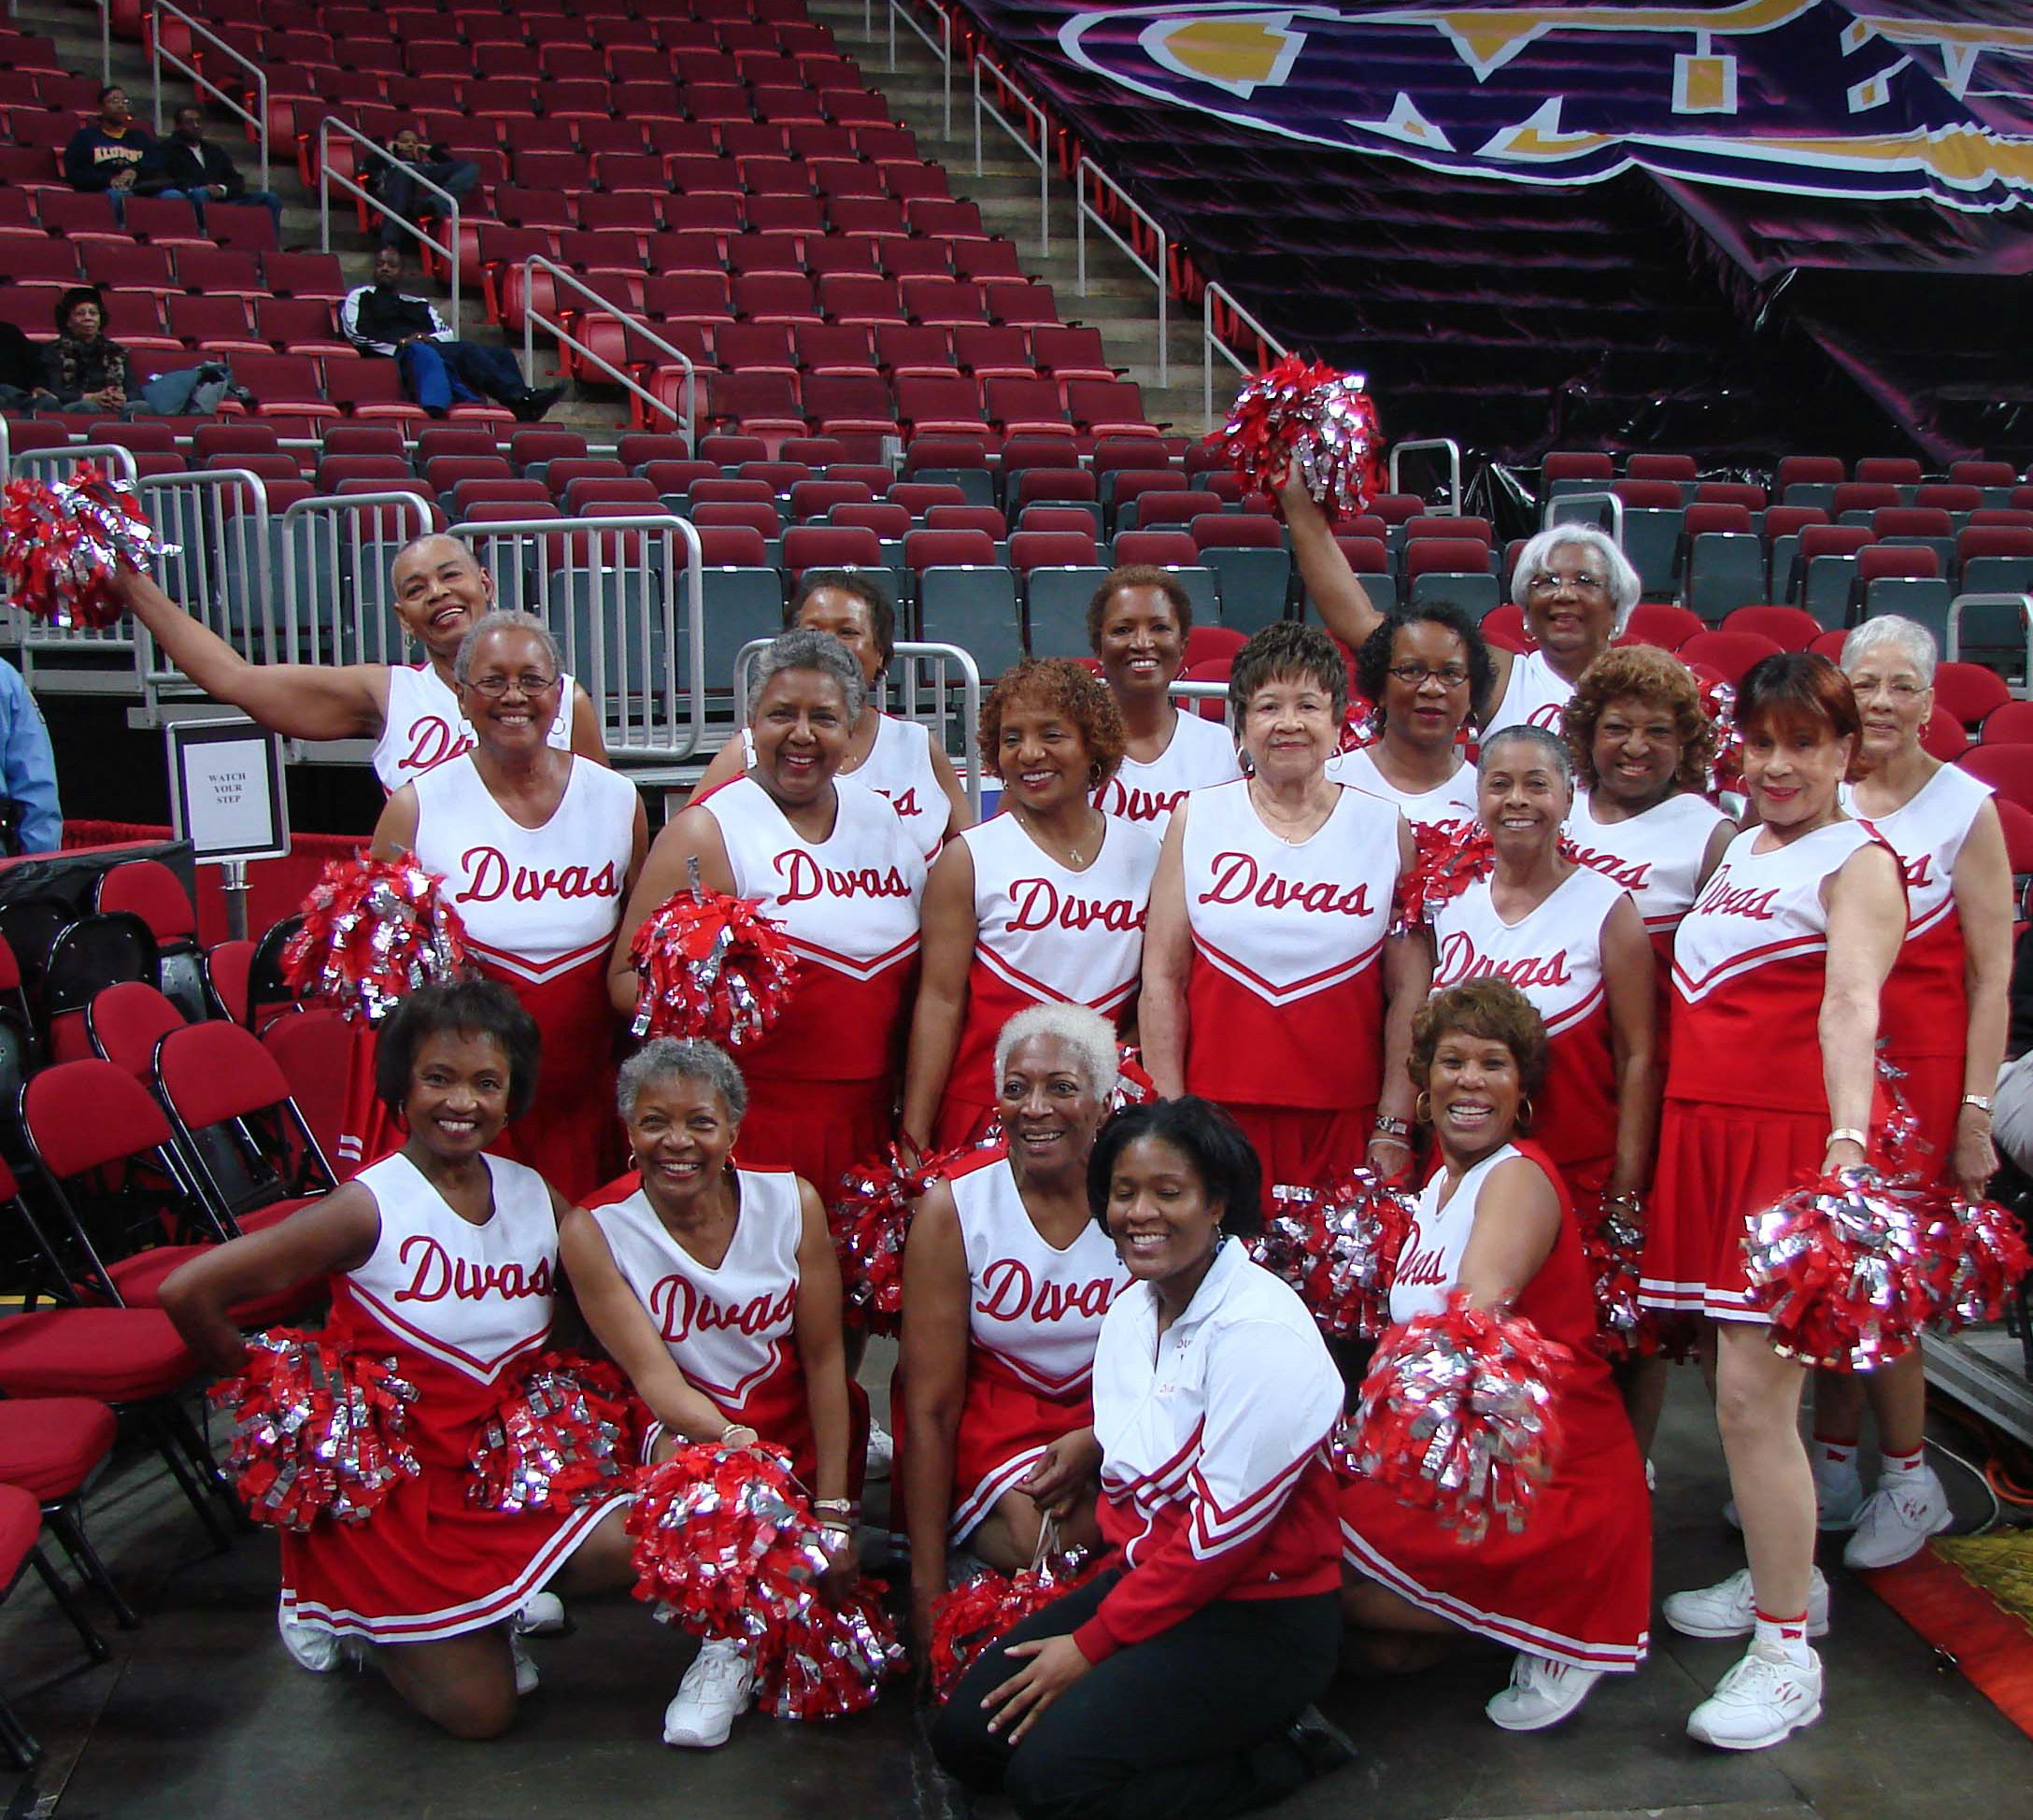 Louise Gooche, 73, said she started the senior citizen cheer squad, Durham Senior Divas 'N Dude, to inspire and empower other elderly people in her community of Durham, N.C.